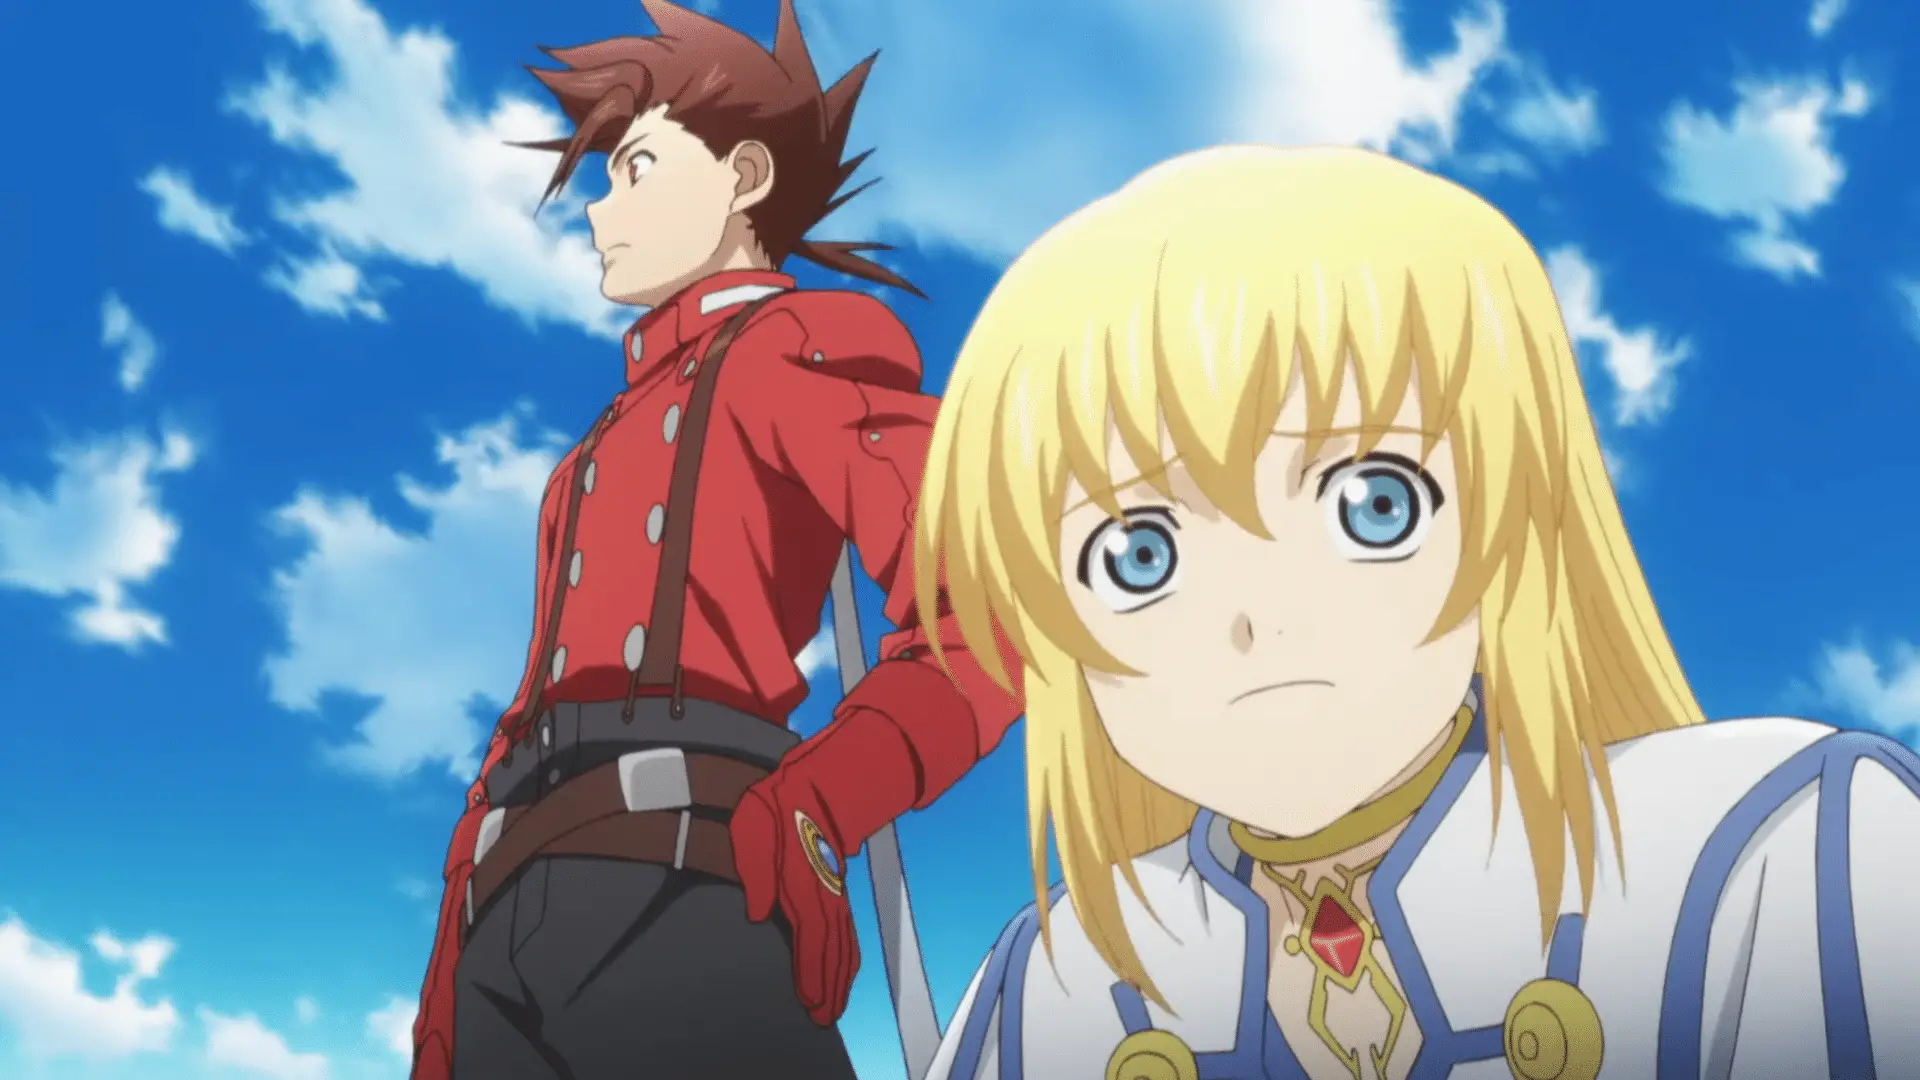 Tales of Symphonia Remastered Switch Version Updating Tomorrow; Fixing Vanished Backgrounds in Menus & Skits